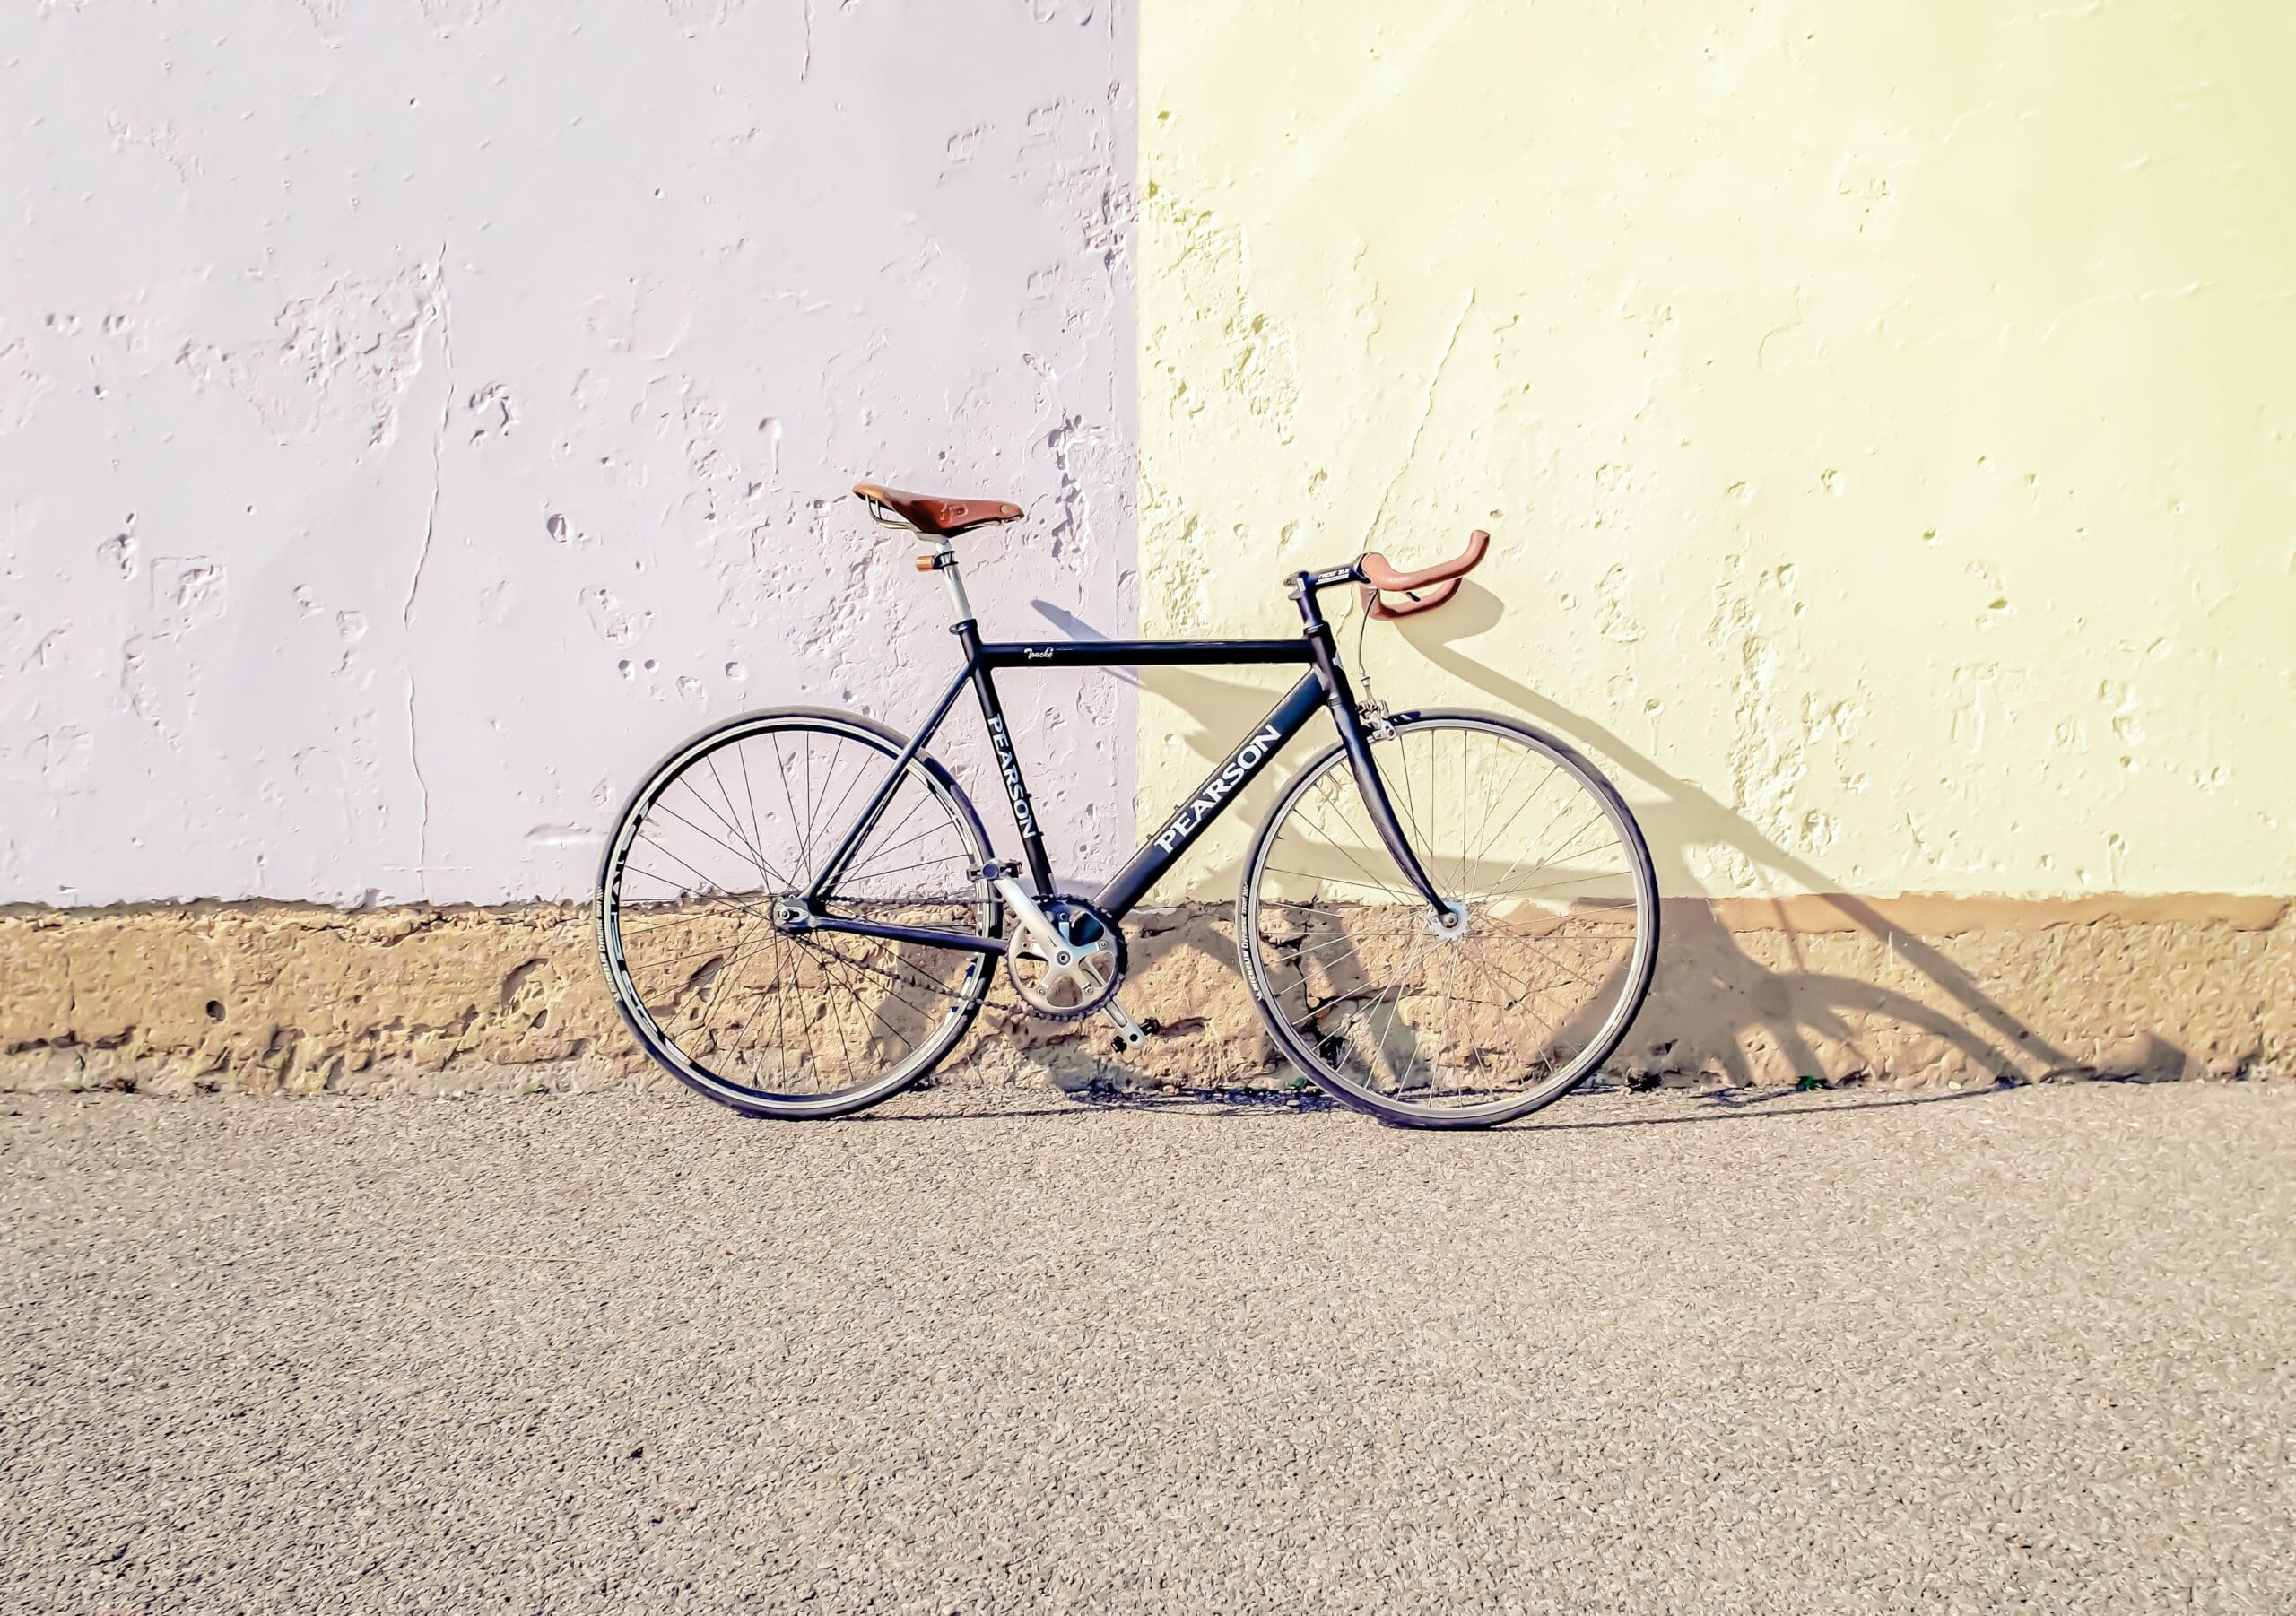 Bicycle leaning on pale coloured wall